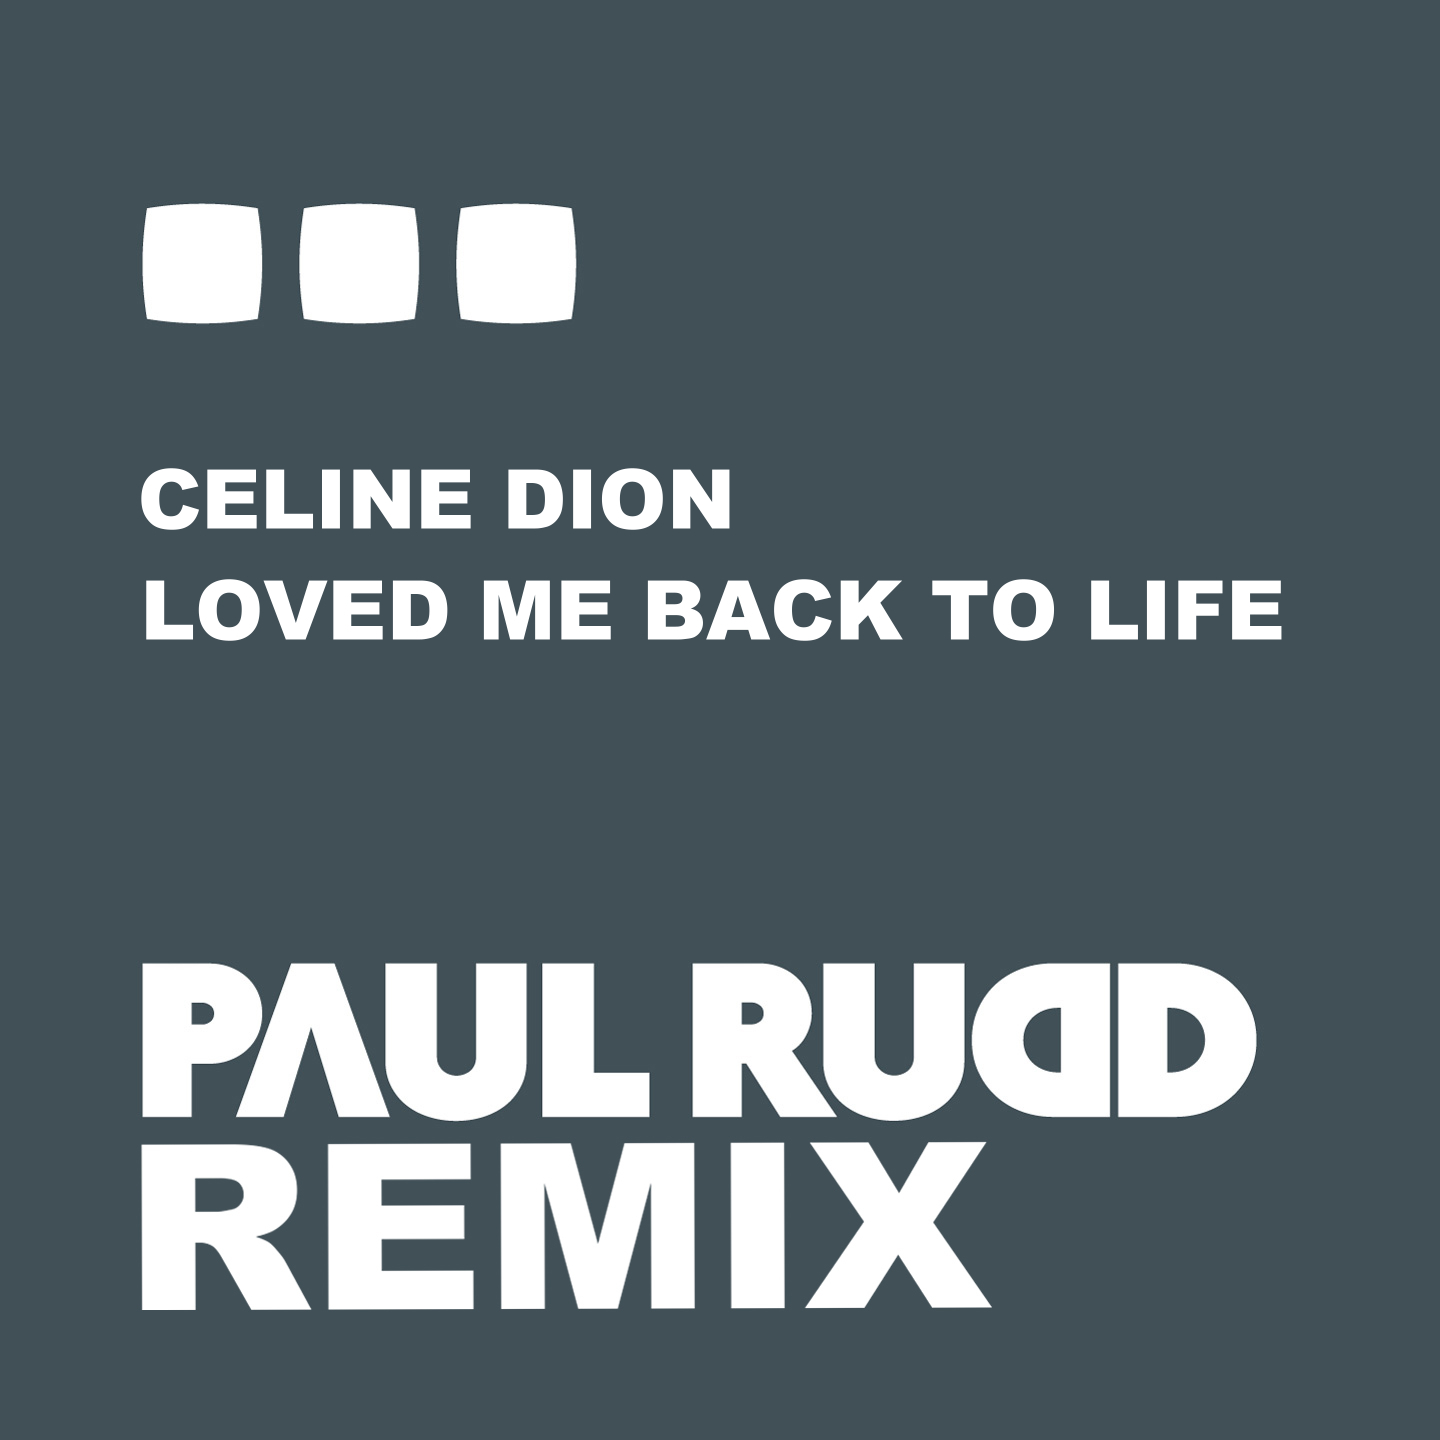 Celine Dion Loved me back to Life. Paul is Life. Back to me. Love me back to Life Natalie перевод.